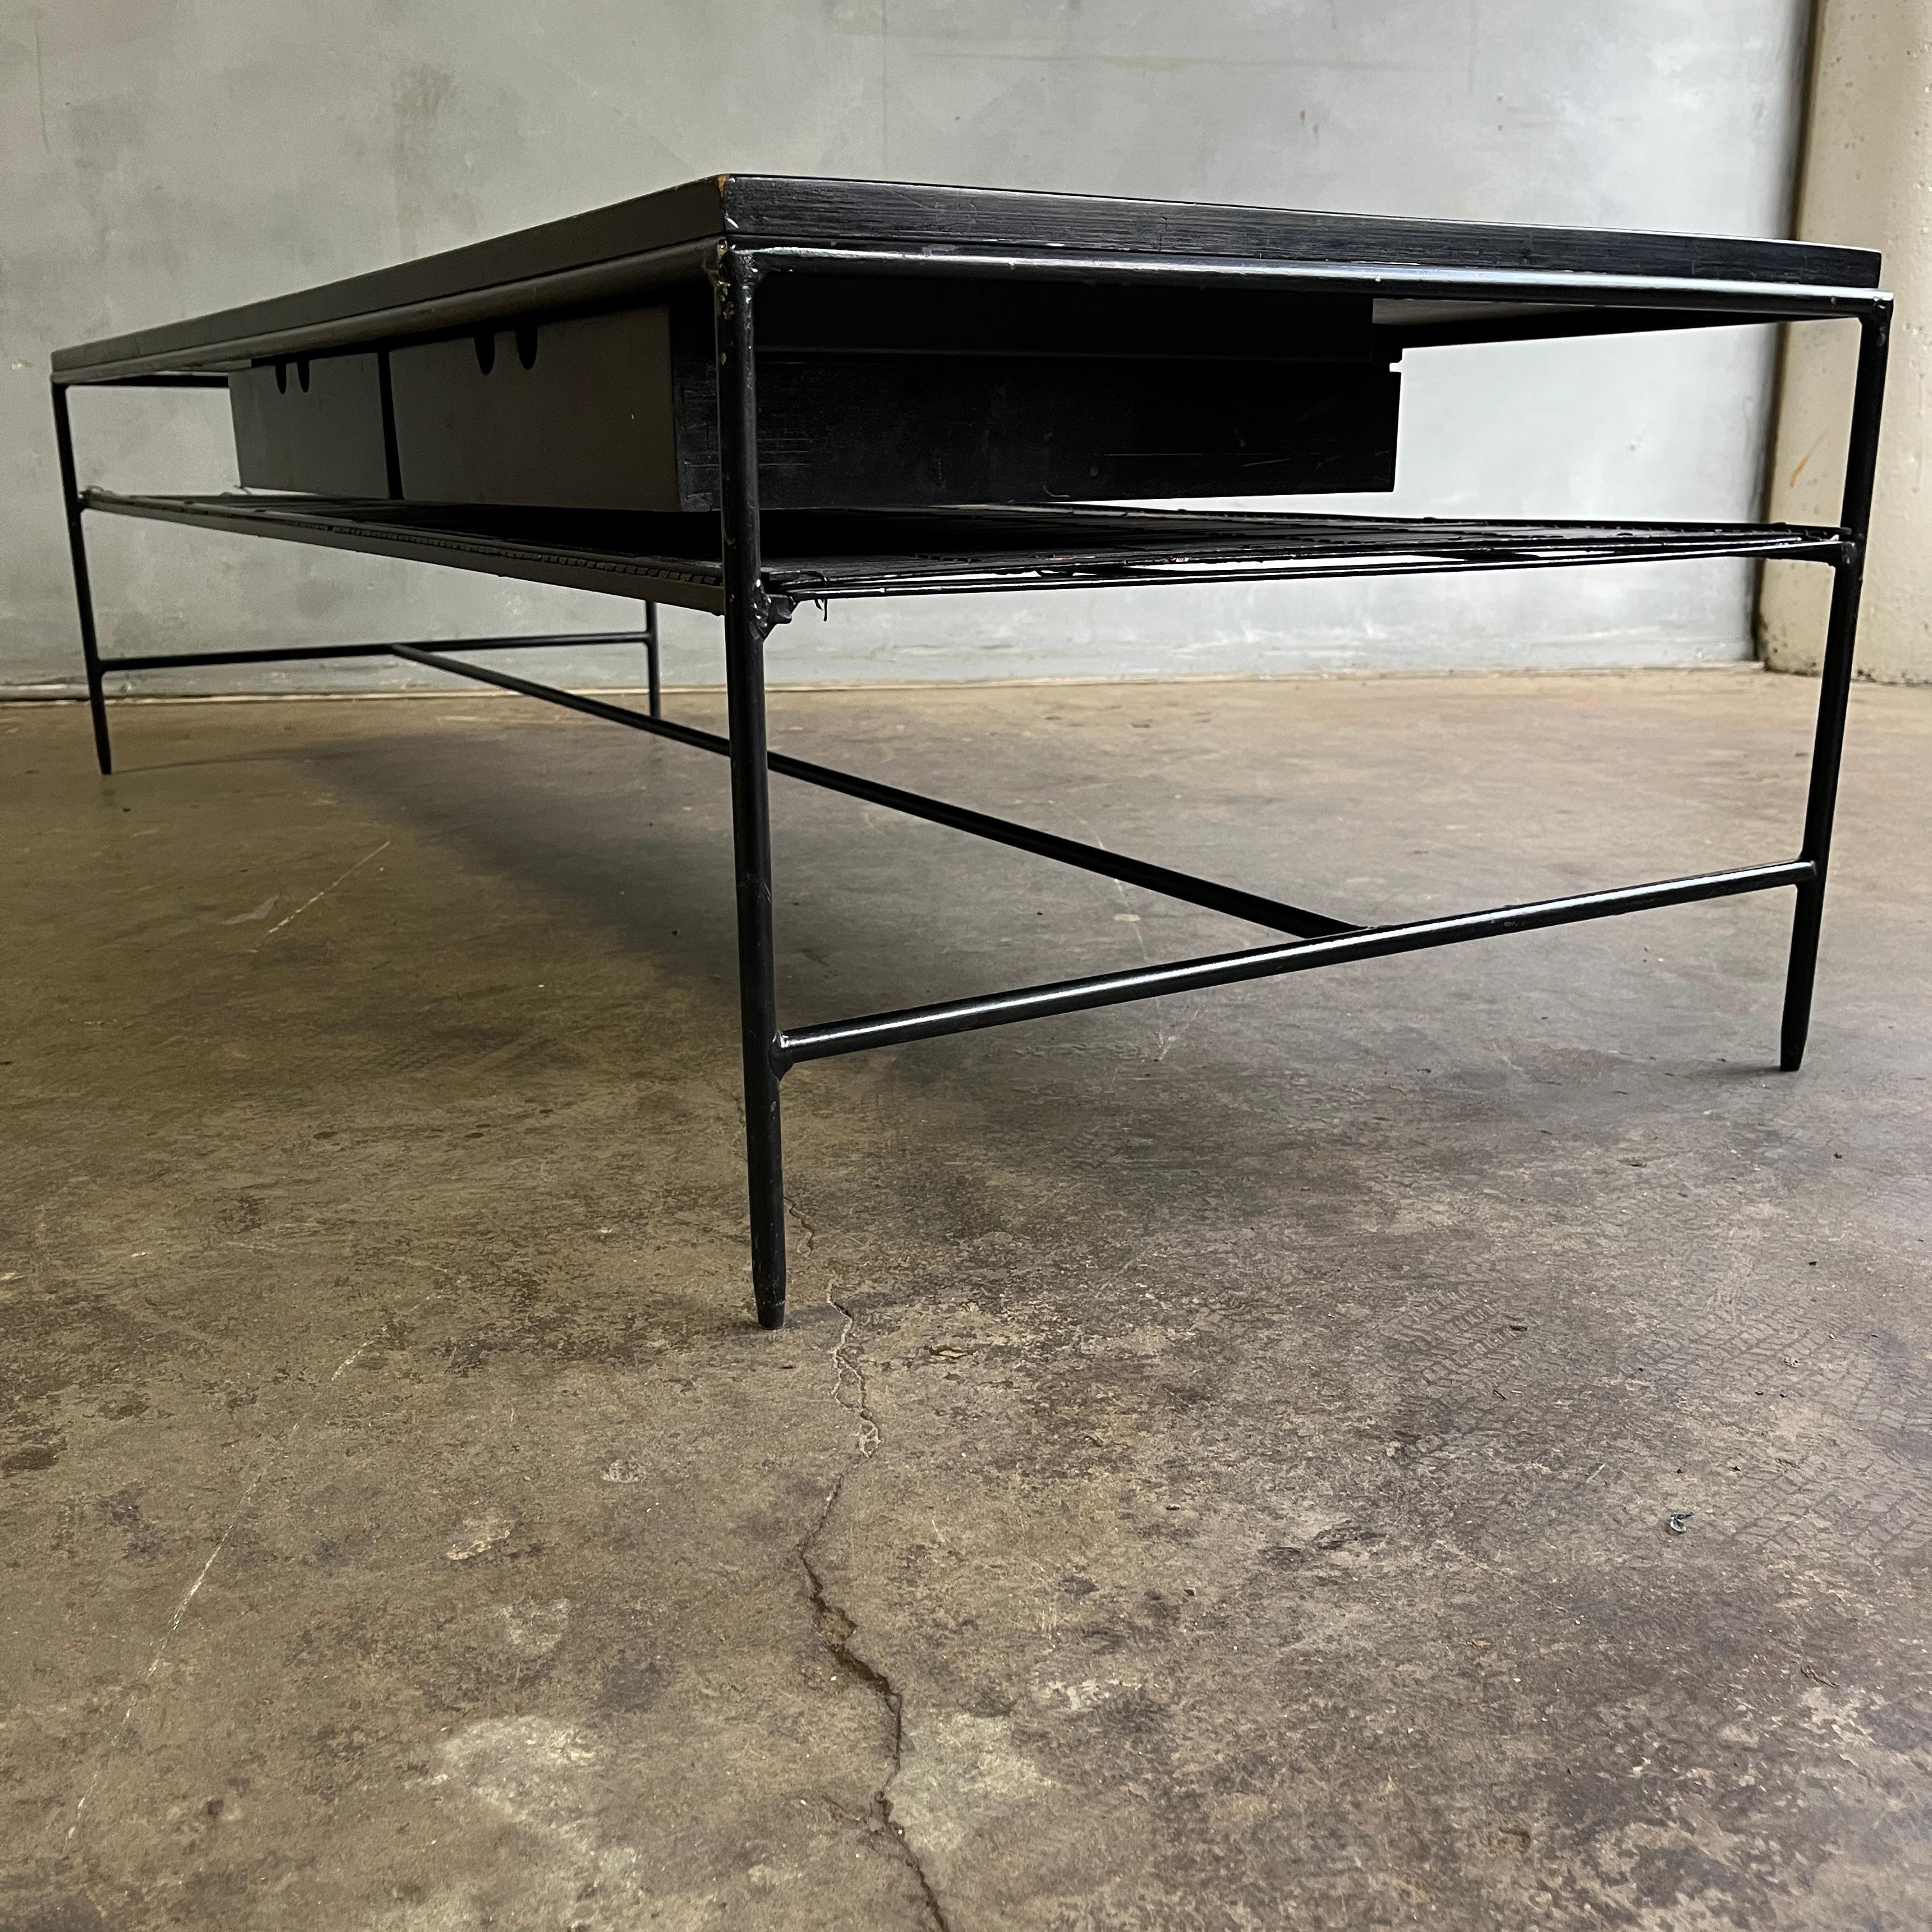 Beautiful Paul McCobb Planner Group #1584 - 60 inch coffee table bench all original black Lacquer finish, Minimalist Iron structure with 2 drawers all original all black finish. Very delicate designed coffee table with iron legs has lower tied slat